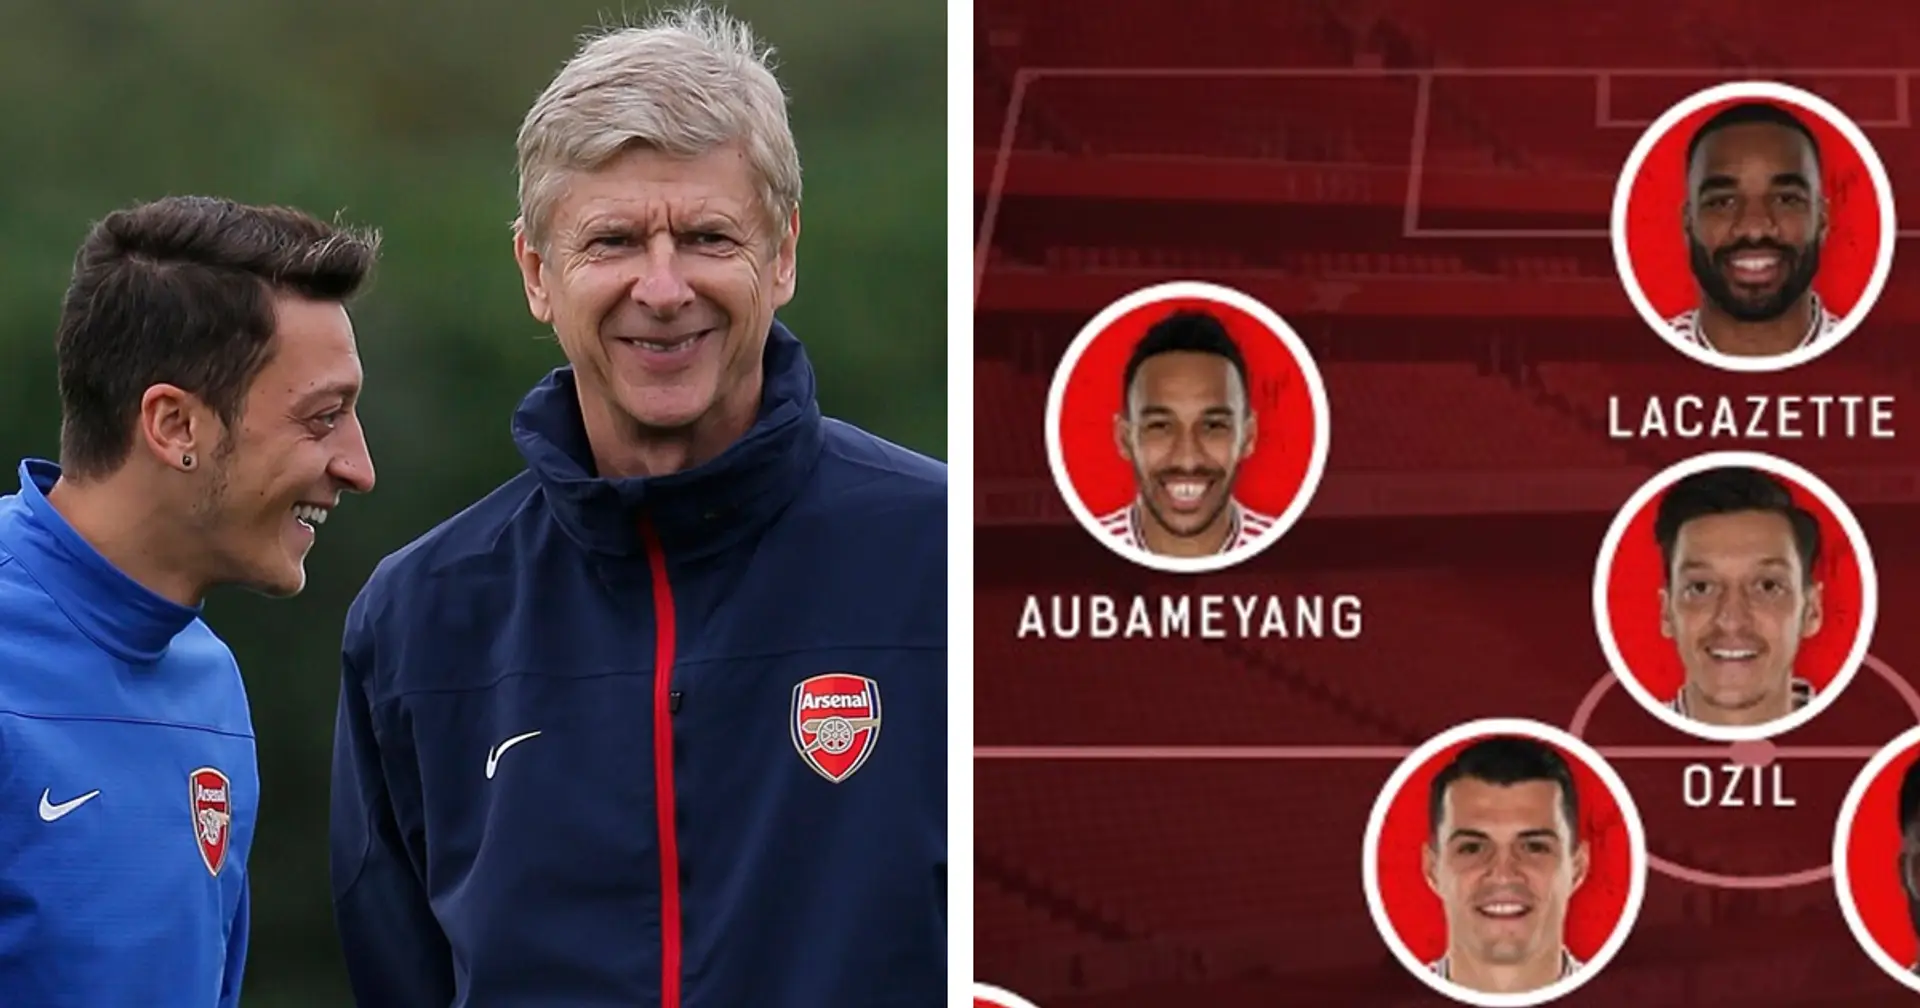 Ozil at 10, 4 at the back, Auba still out wide: how Arsenal's XI would look today with Wenger in charge